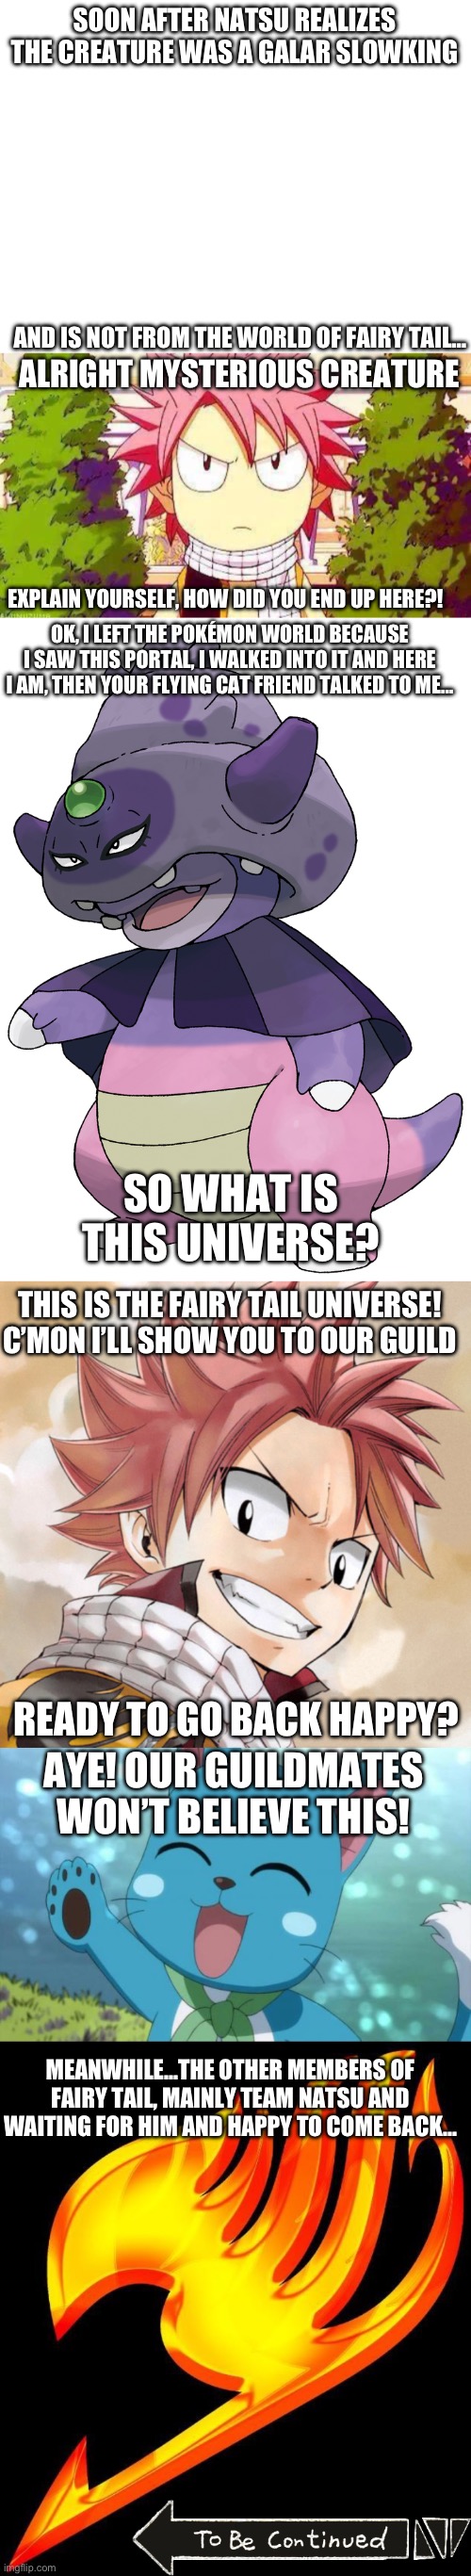 What if Galar Slowking met the members of the Fairy Tail Guild? Part 2 | SOON AFTER NATSU REALIZES THE CREATURE WAS A GALAR SLOWKING; AND IS NOT FROM THE WORLD OF FAIRY TAIL…; ALRIGHT MYSTERIOUS CREATURE; EXPLAIN YOURSELF, HOW DID YOU END UP HERE?! OK, I LEFT THE POKÉMON WORLD BECAUSE I SAW THIS PORTAL, I WALKED INTO IT AND HERE I AM, THEN YOUR FLYING CAT FRIEND TALKED TO ME…; SO WHAT IS THIS UNIVERSE? THIS IS THE FAIRY TAIL UNIVERSE! C’MON I’LL SHOW YOU TO OUR GUILD; READY TO GO BACK HAPPY? AYE! OUR GUILDMATES WON’T BELIEVE THIS! MEANWHILE…THE OTHER MEMBERS OF FAIRY TAIL, MAINLY TEAM NATSU AND WAITING FOR HIM AND HAPPY TO COME BACK… | image tagged in galar slowking,anime crossover,fairy tail,pokemon,natsu dragneel,happy | made w/ Imgflip meme maker